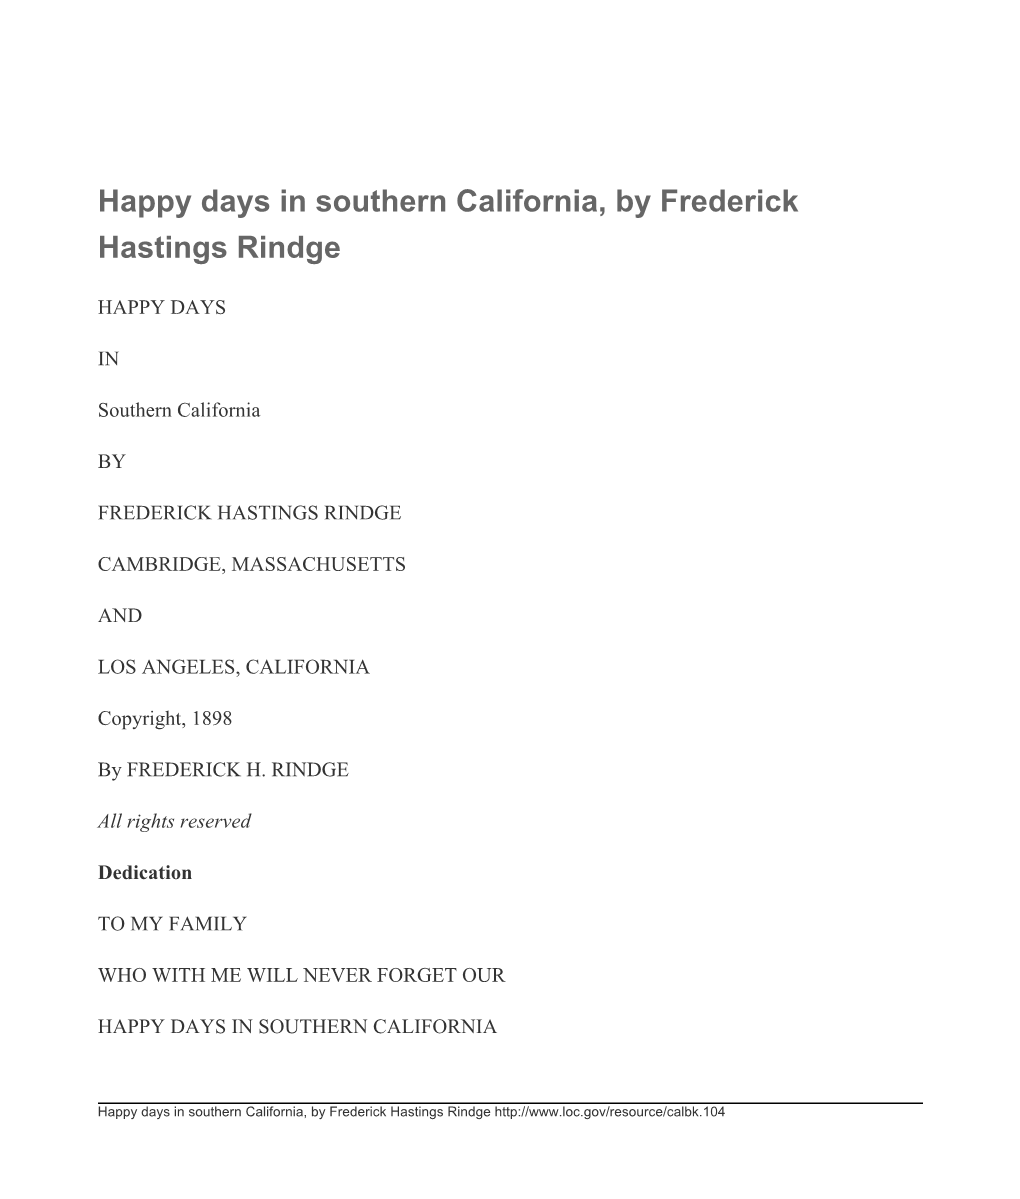 Happy Days in Southern California, by Frederick Hastings Rindge